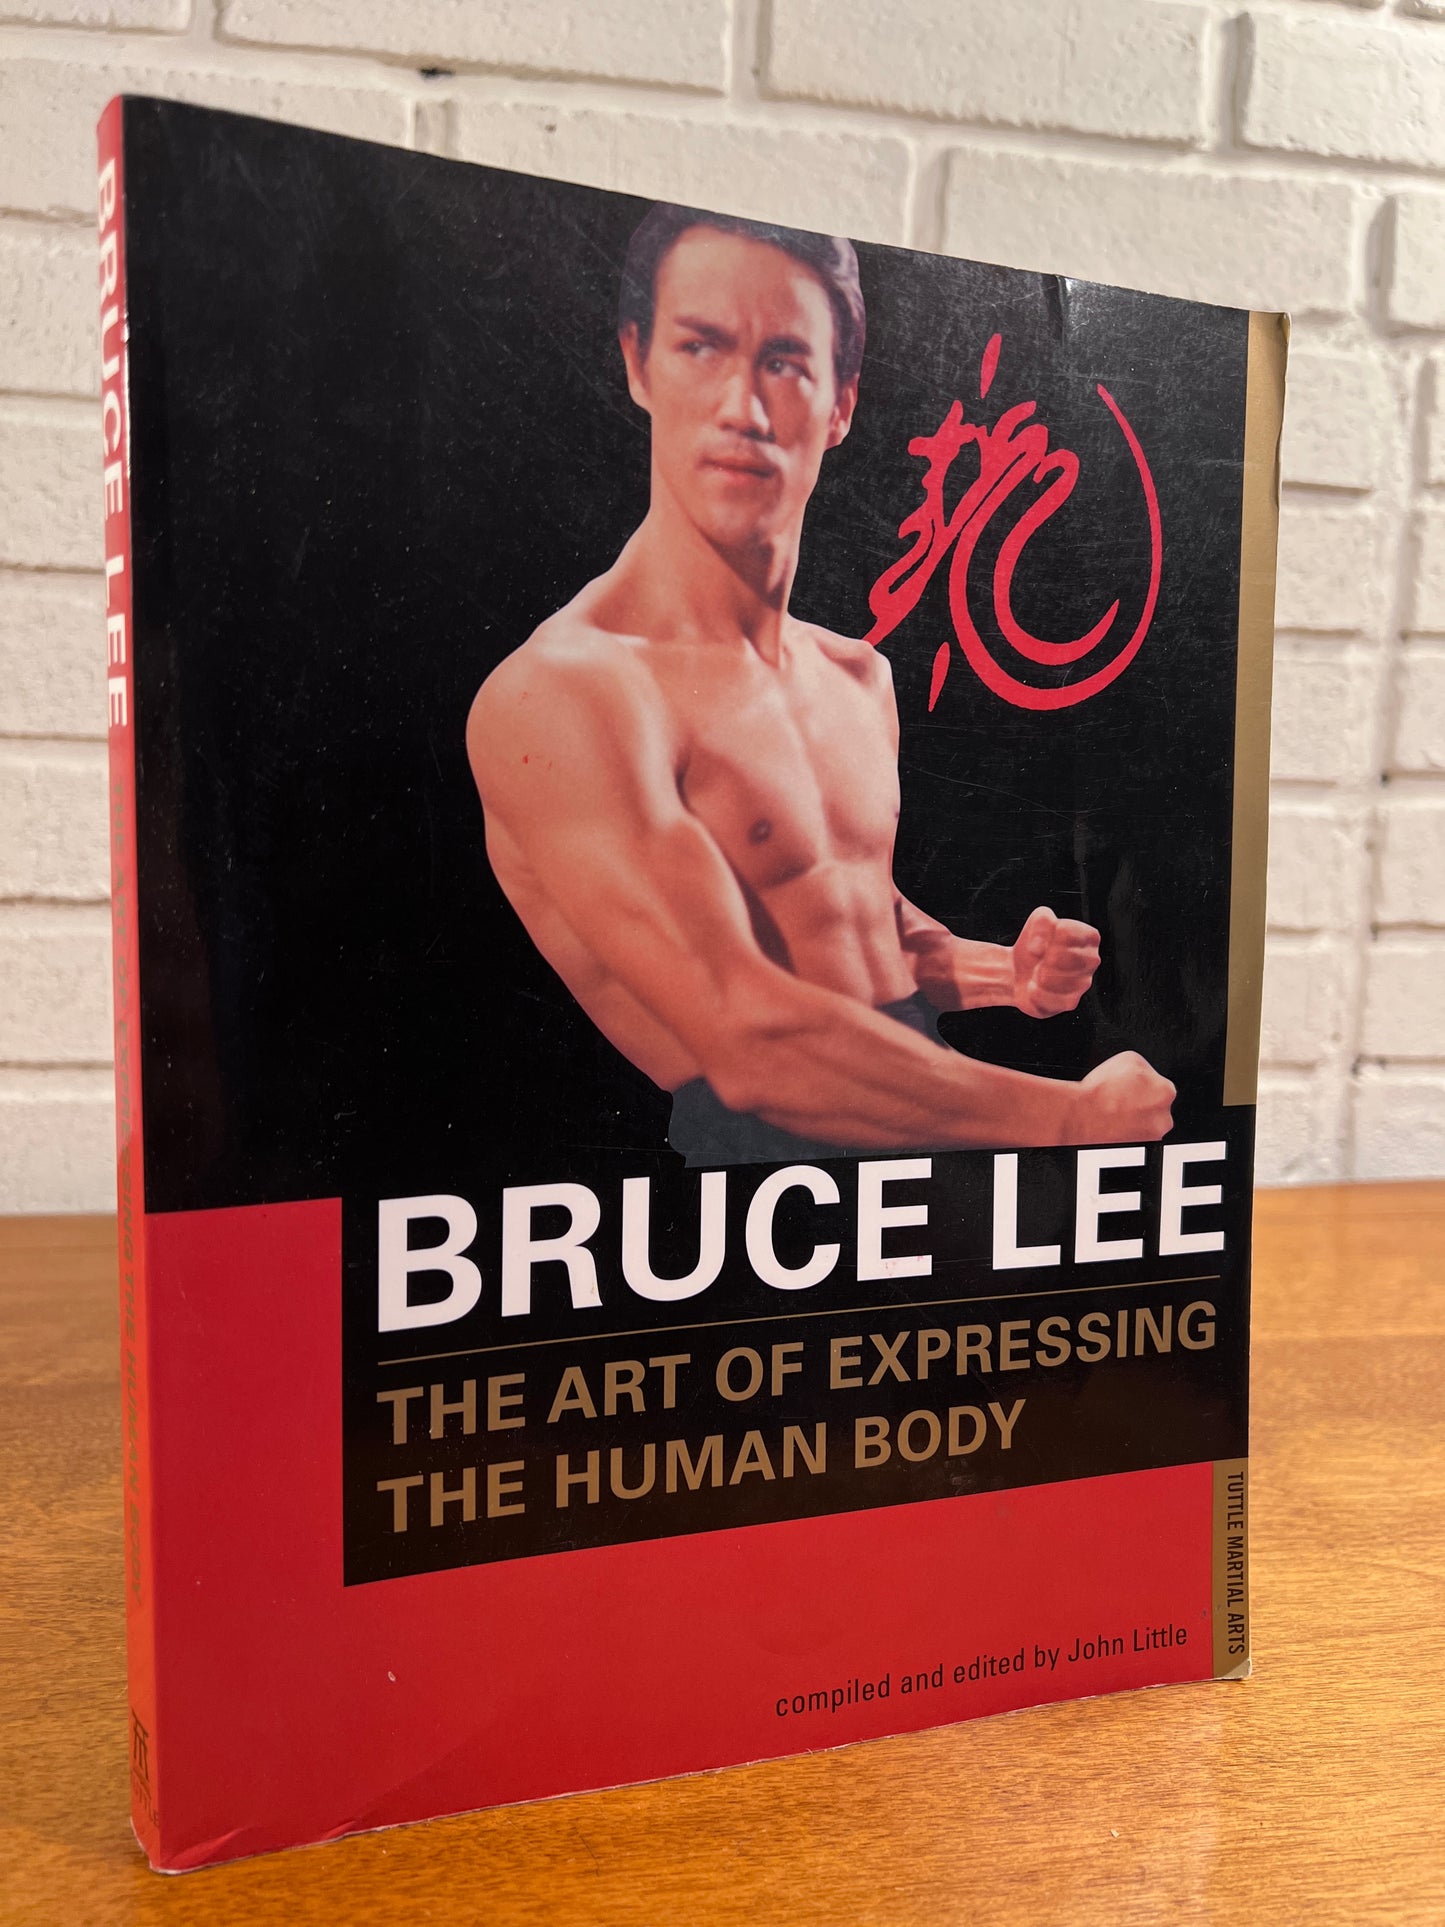 Bruce Lee: The Art of Expressing the Human Body by John Little